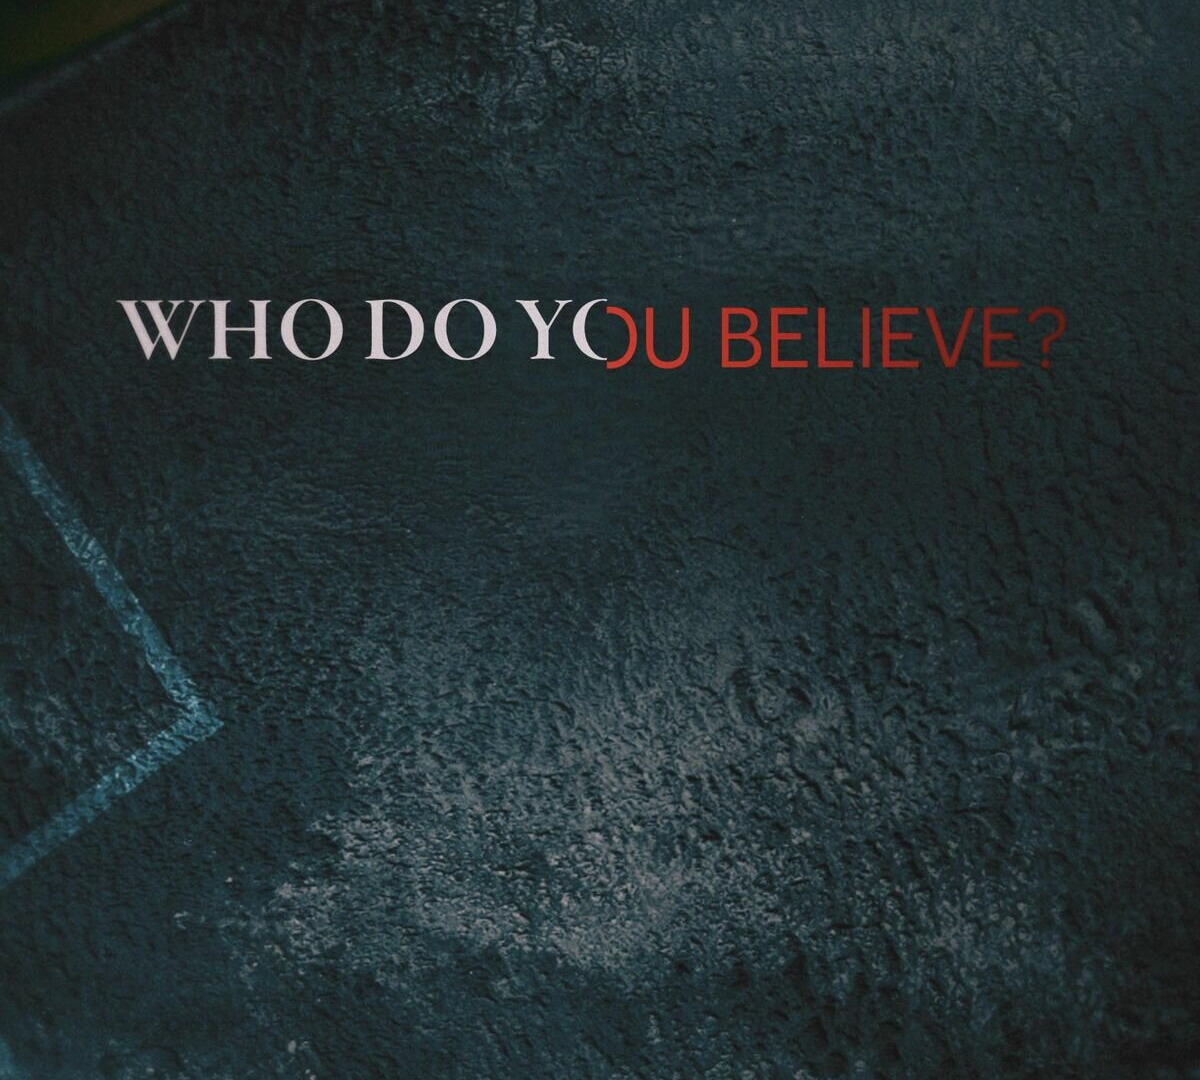 Show Who Do You Believe?